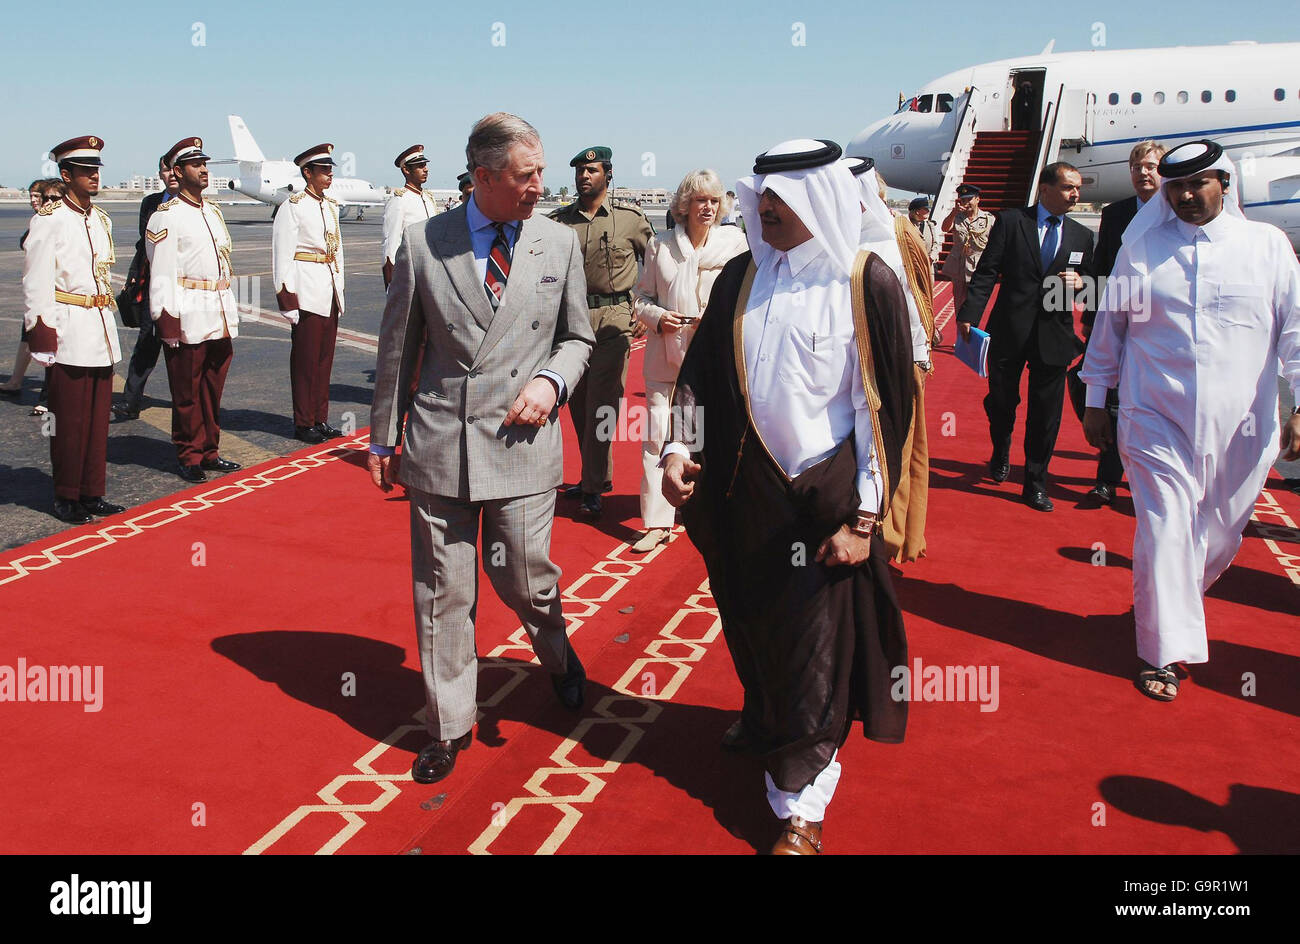 The Prince of Wales walks with Sheikh Hamad Bin Suhaim, the Minister of State for ruling family affairs, with the Duchess of Cornwall behind them, after arriving in the Gulf State of Qatar, this morning. Stock Photo